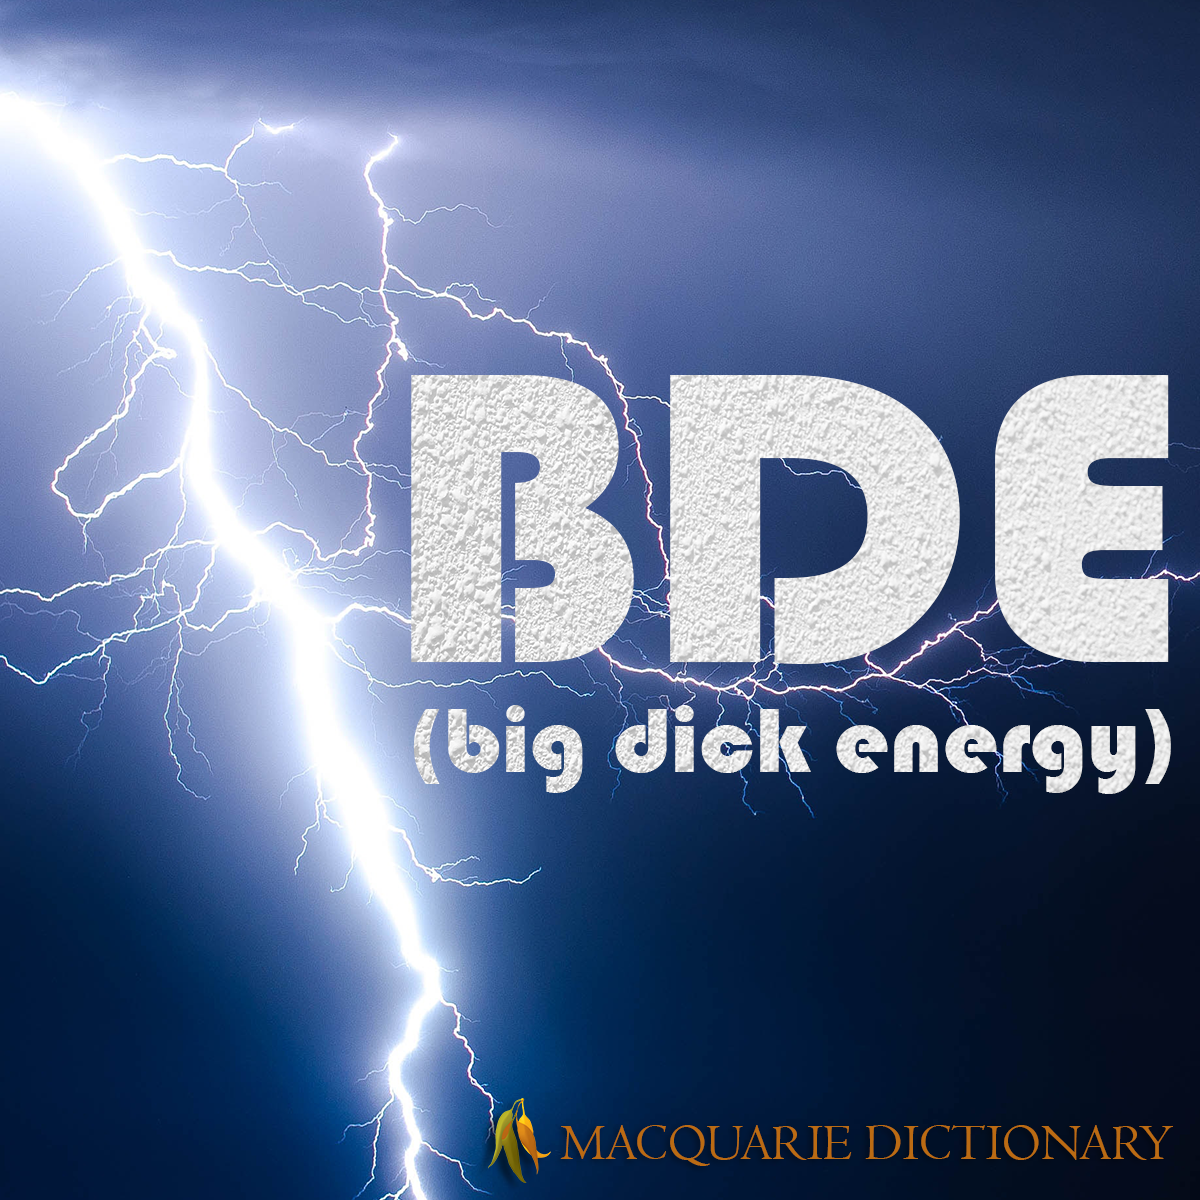 Image of Macquarie Dictionary Word of the Year - BDE (big dick energy) a sense of self-confidence, unaccompanied by arrogance or conceit. 